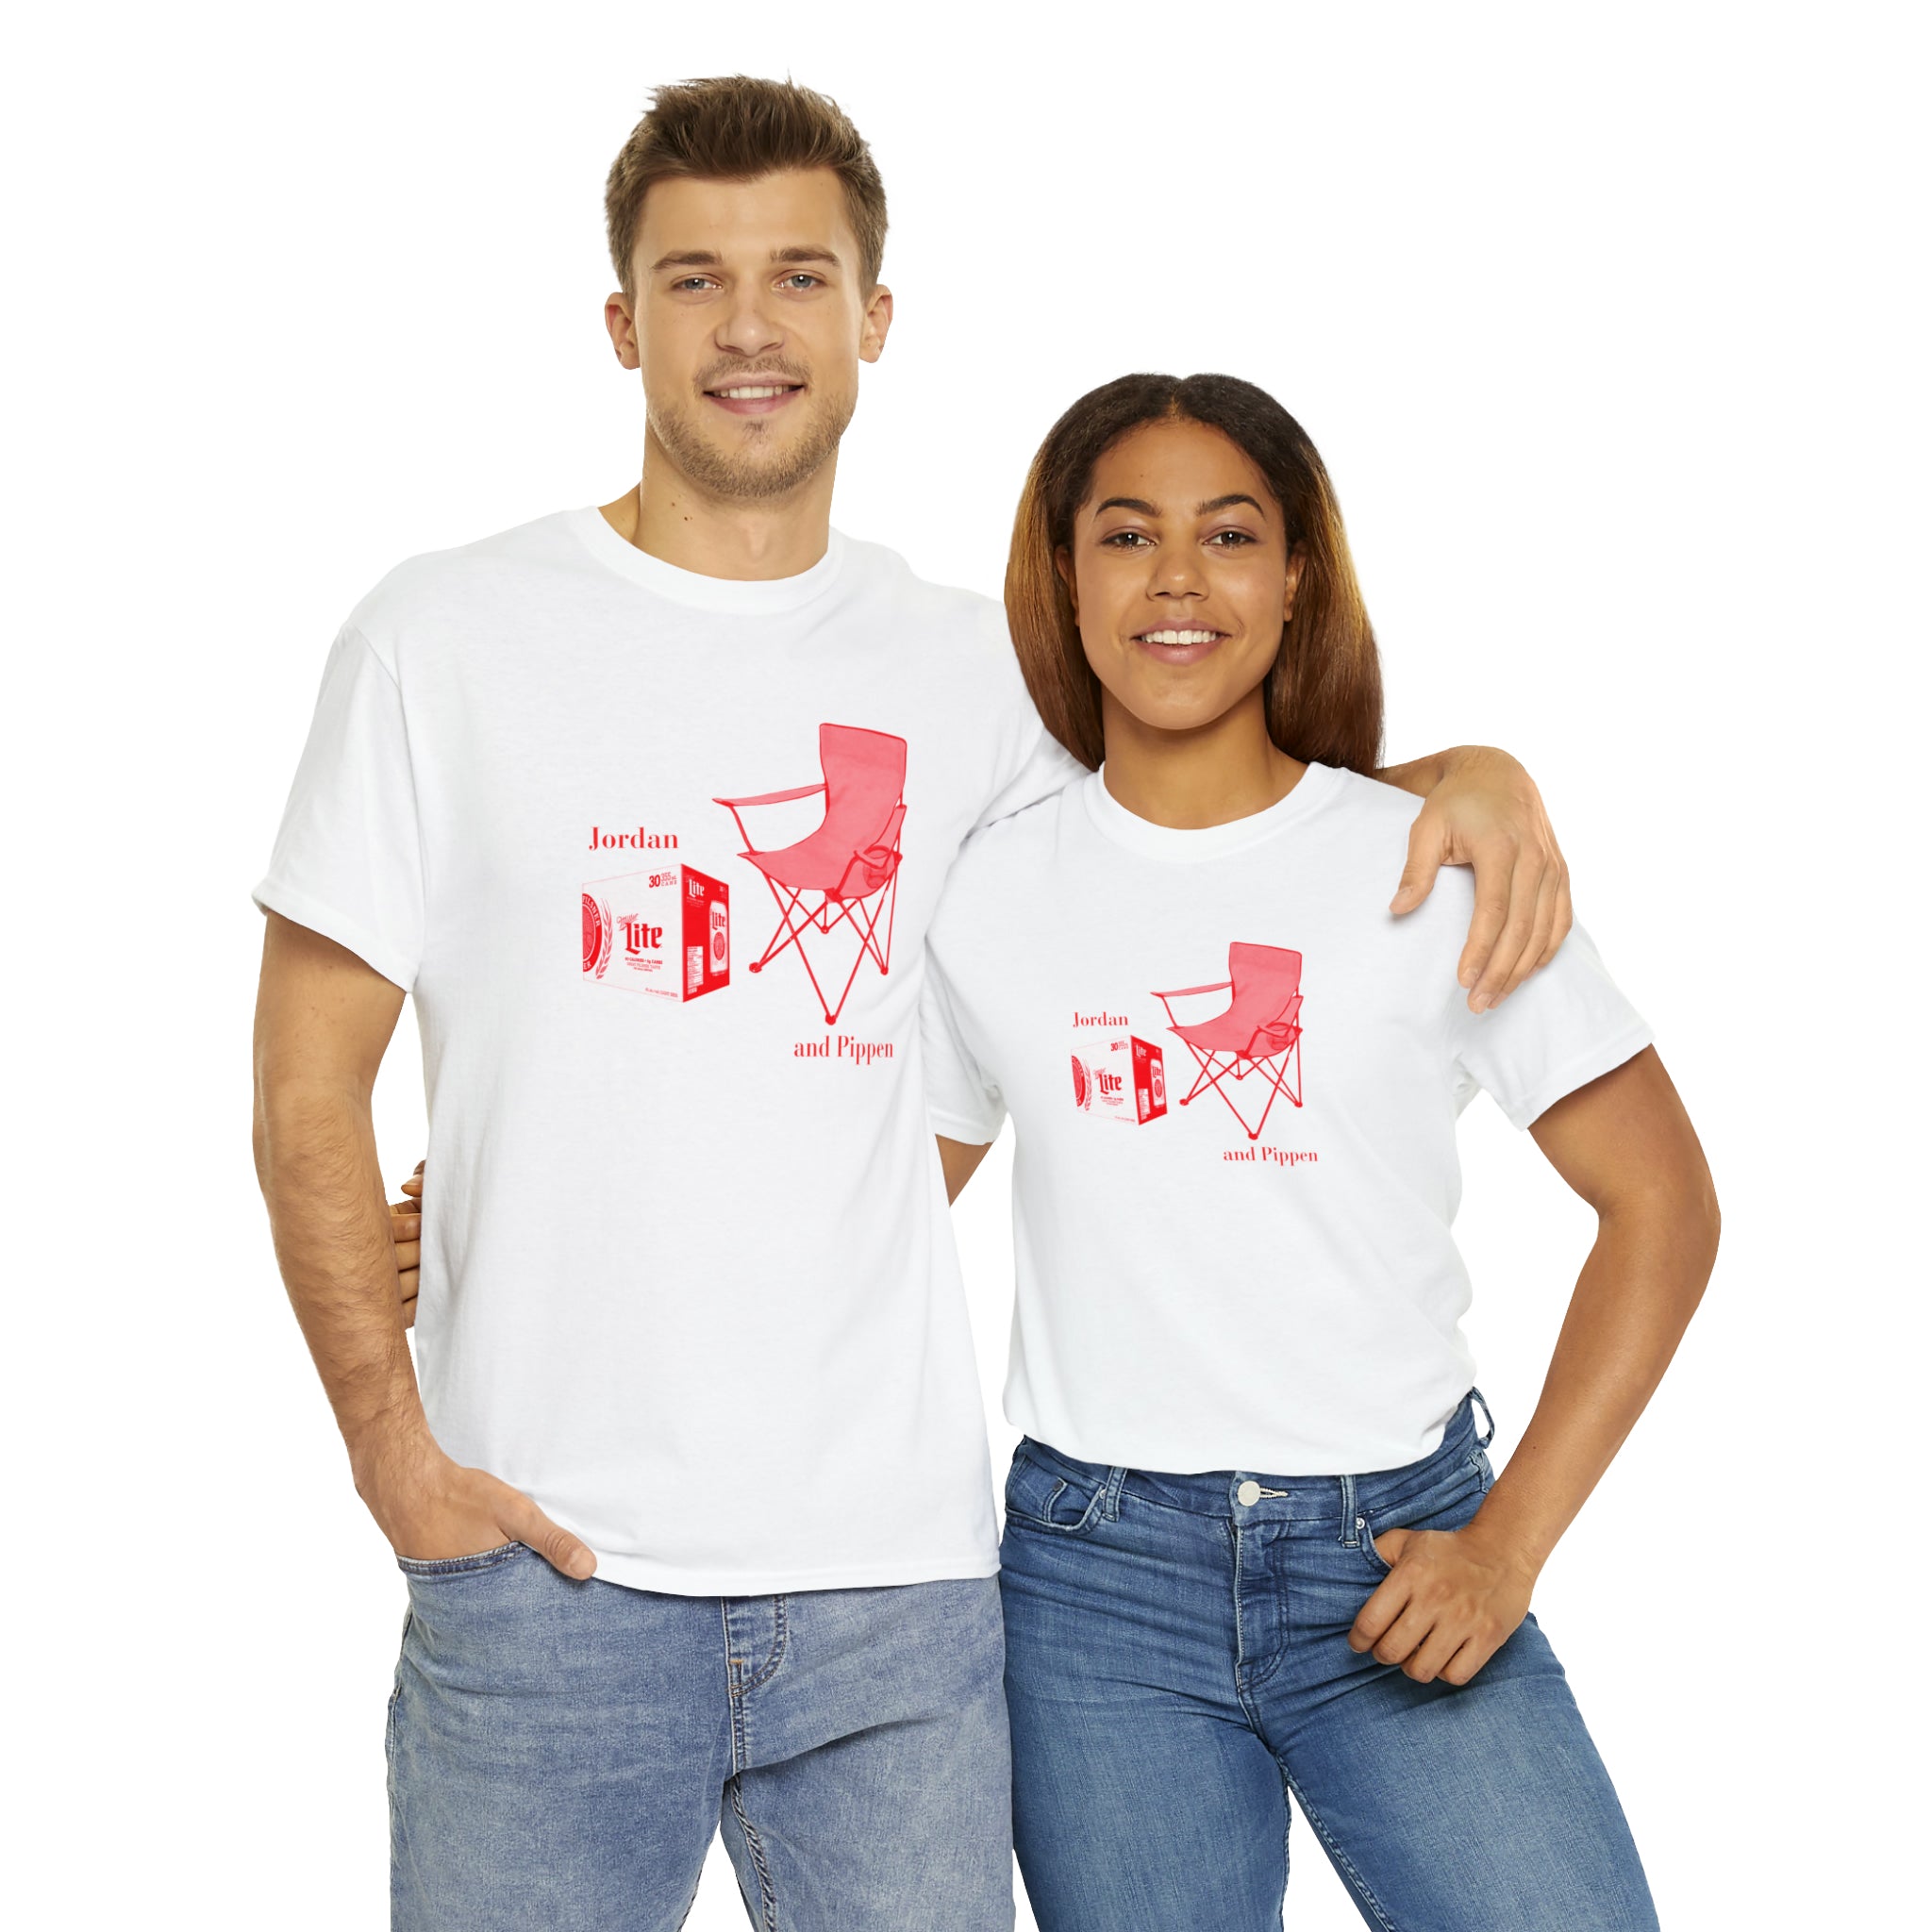 Jordan and Pippen 30 rack and chair - Unisex Heavy Cotton Tee